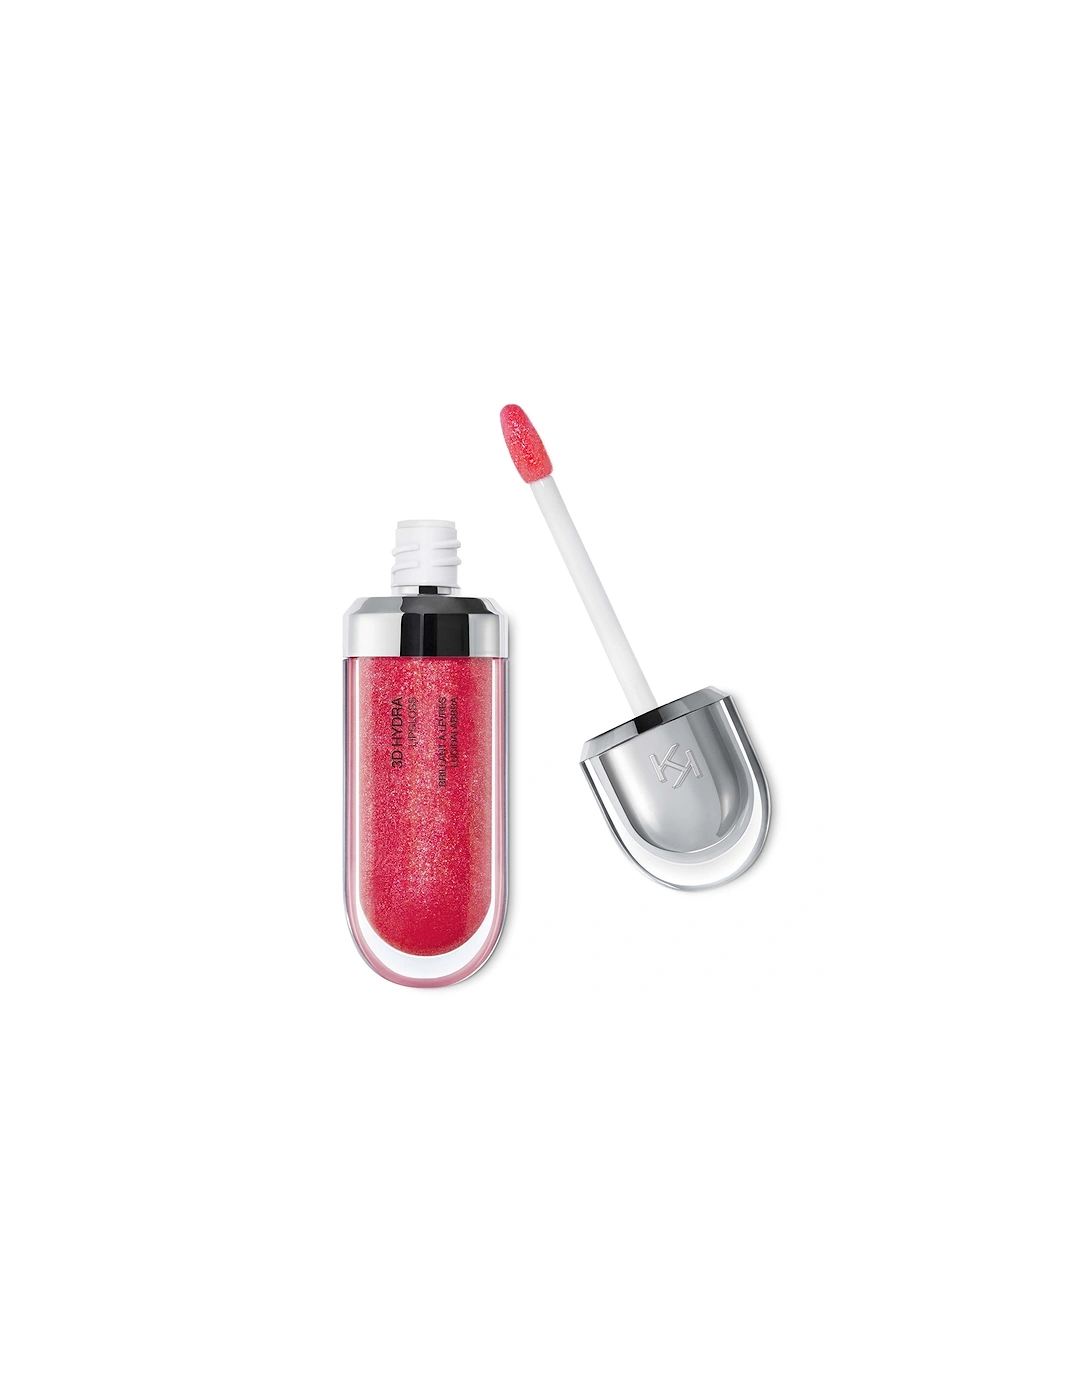 3D Hydra Lipgloss 6.5ml - 12 Pearly Amaryllis Red, 2 of 1